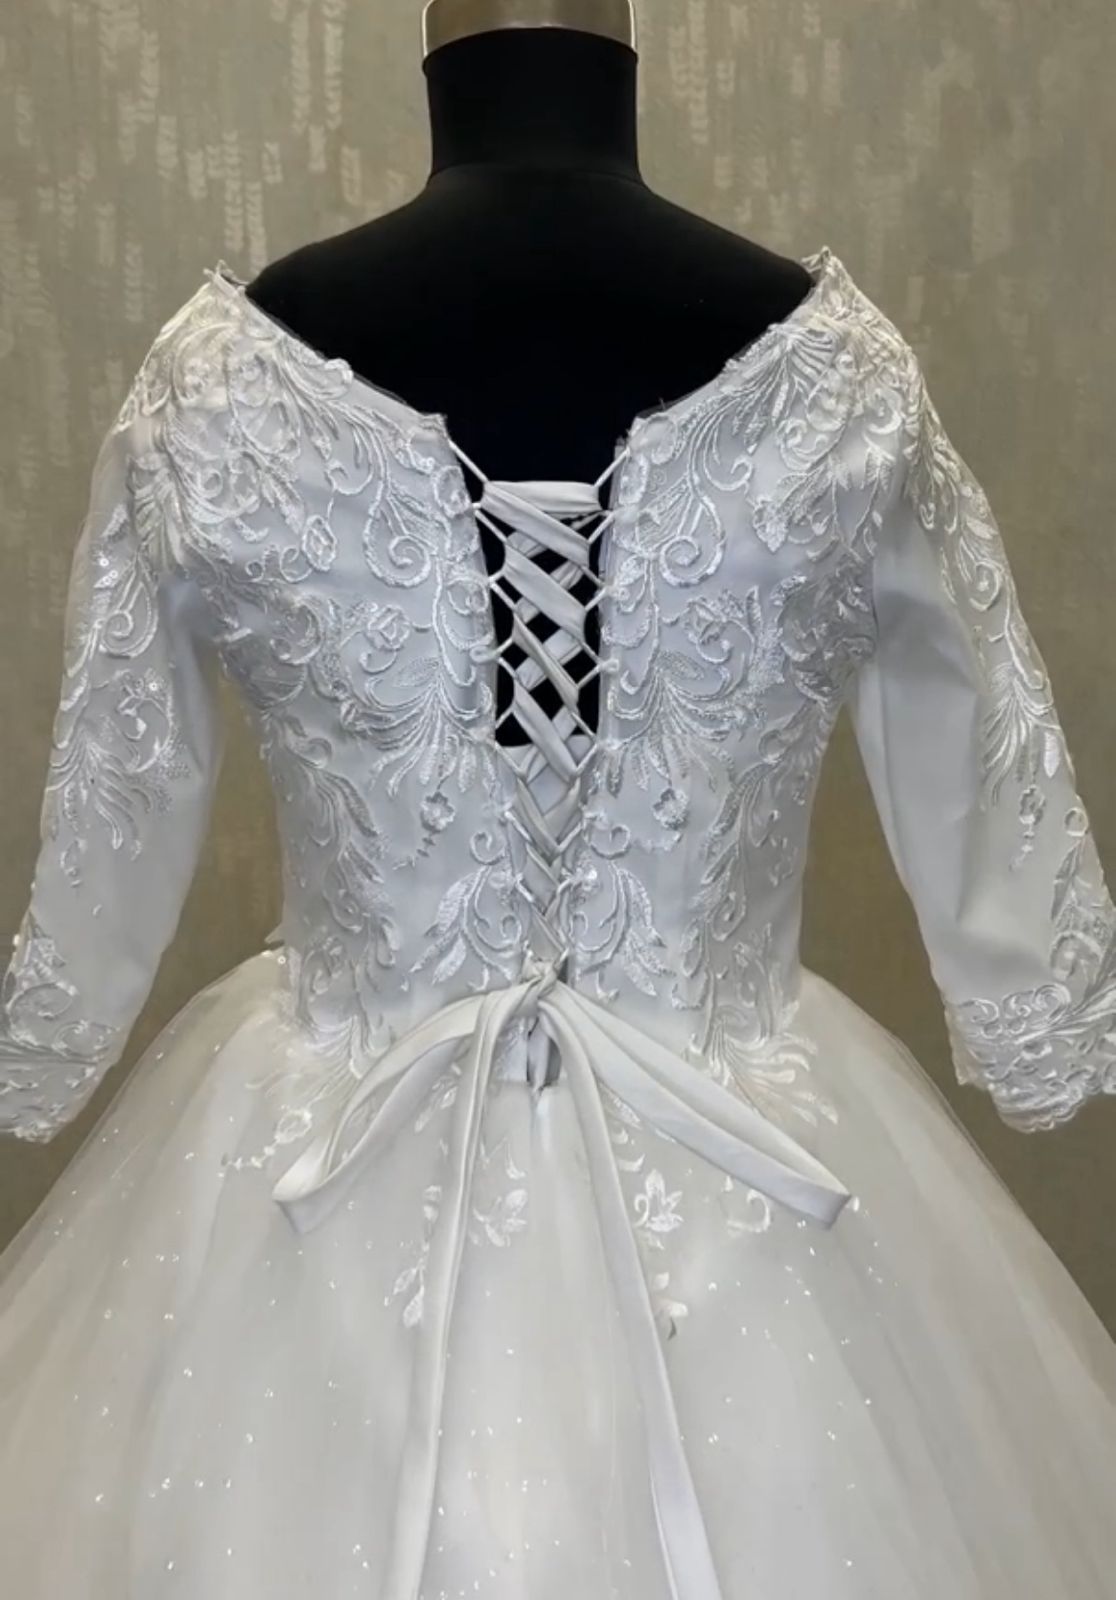 GownLink's Traditional White Wedding Ball Gown for the Christian Bride Who Wants to Honor Her Faith GLGF051B With Covered Transparent  Area